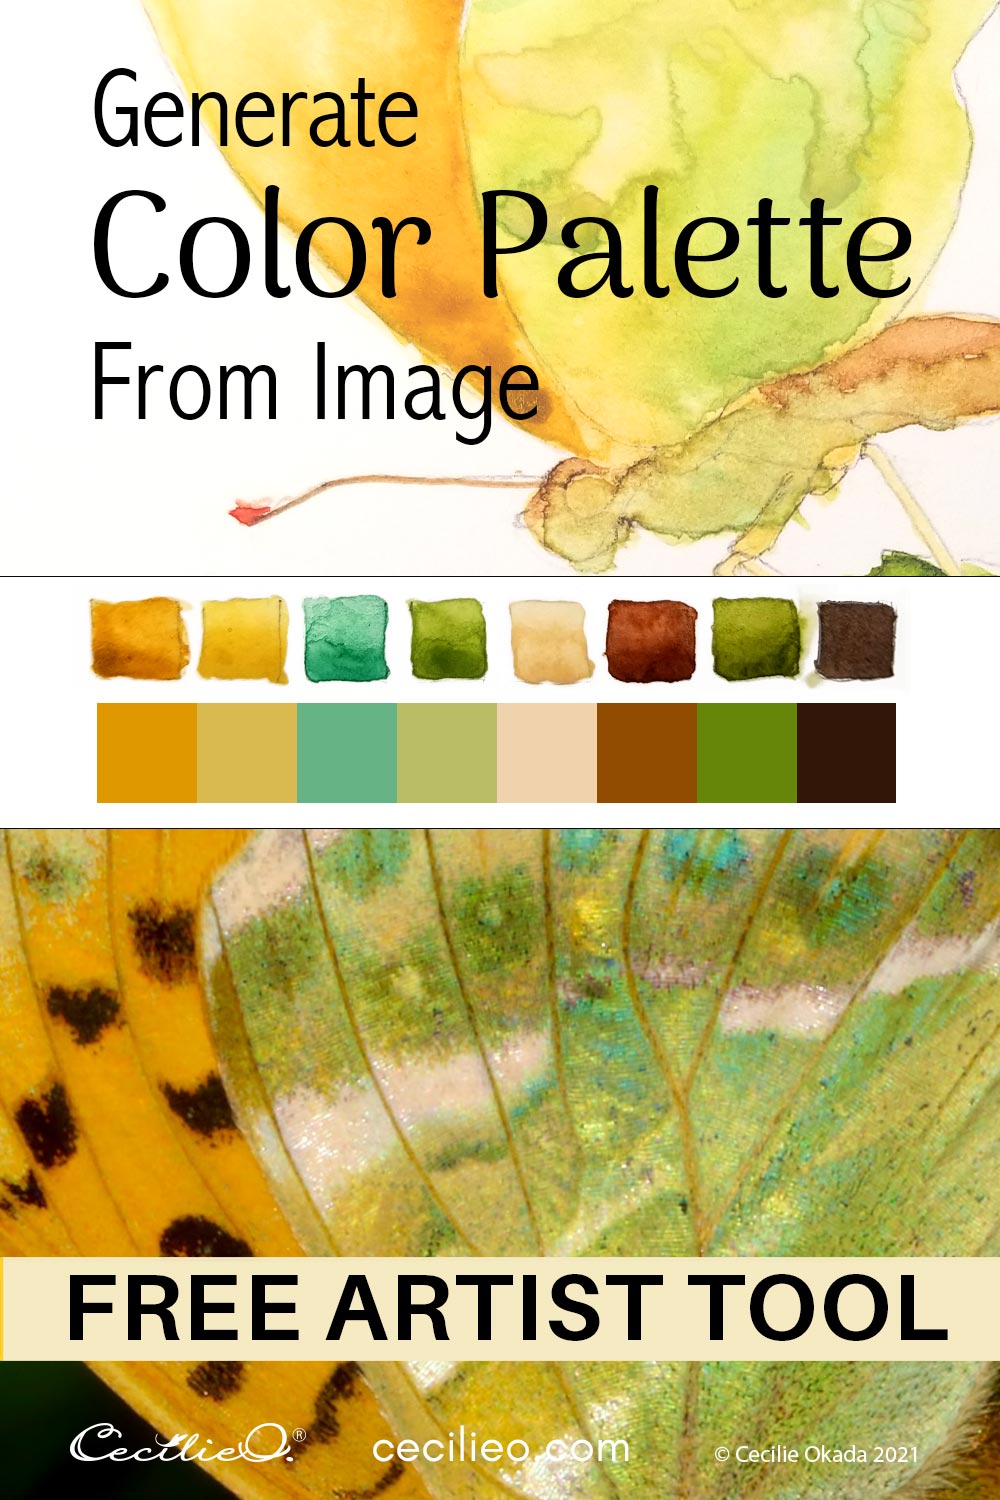 Recollection Parlament Foresee Free, Easy Artist Tool: Create a Color Palette From Image